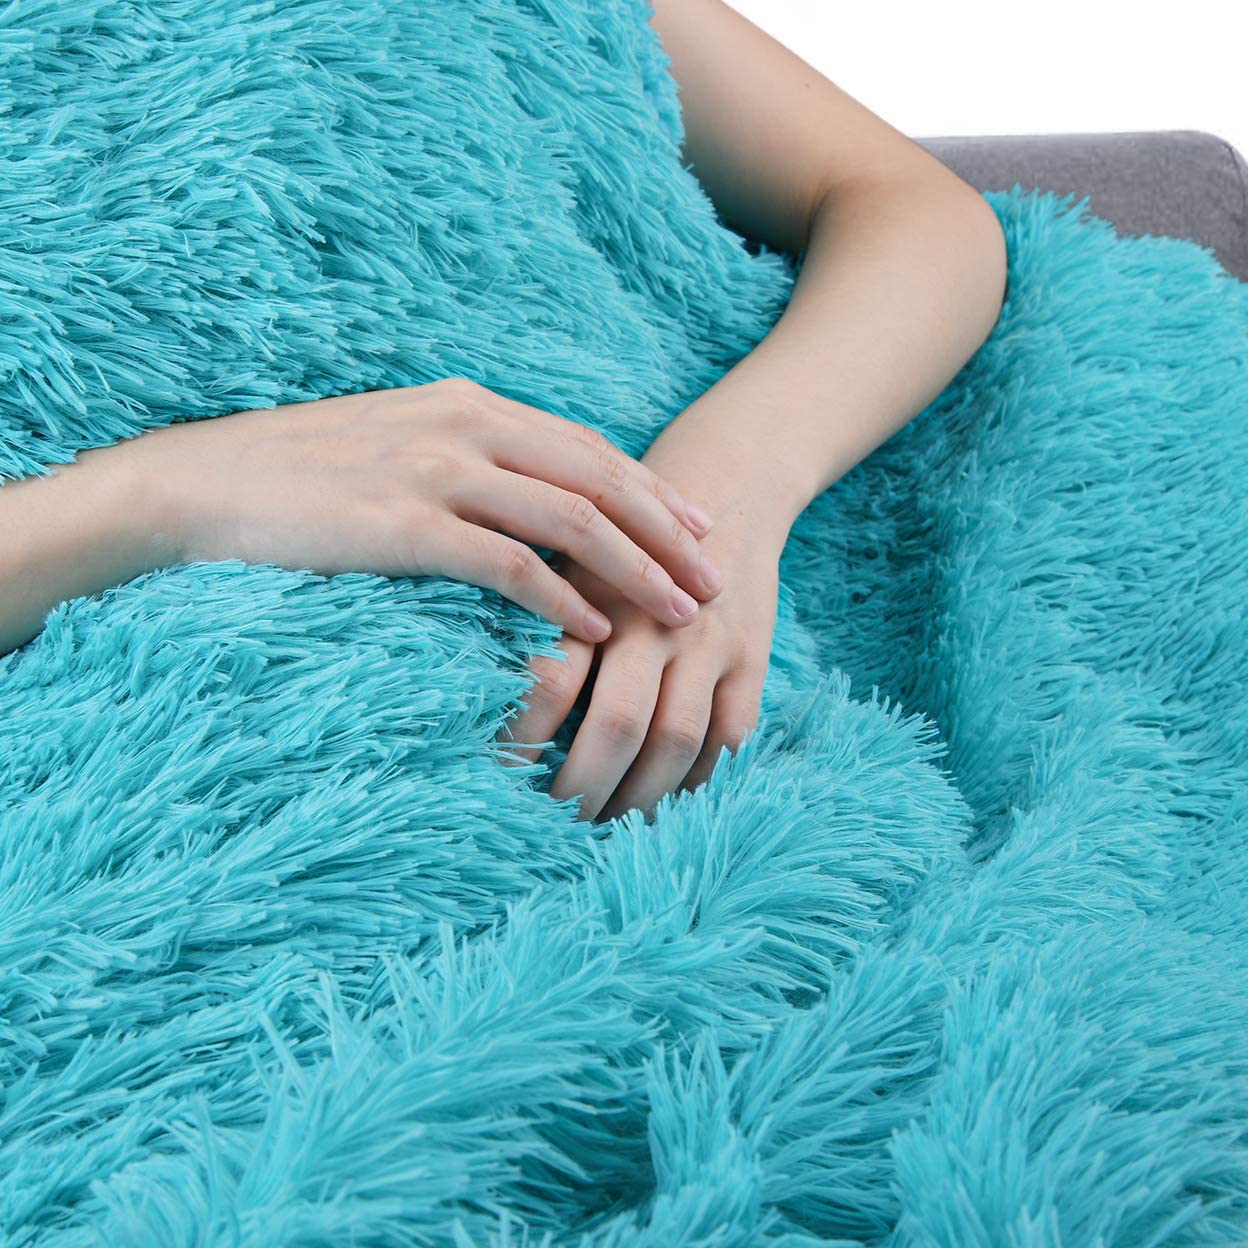 Cozy Double-Sided Fluffy Blanket: Warm Winter Bedspread, Plush Sofa Cover, and Stylish Home Decor Accent